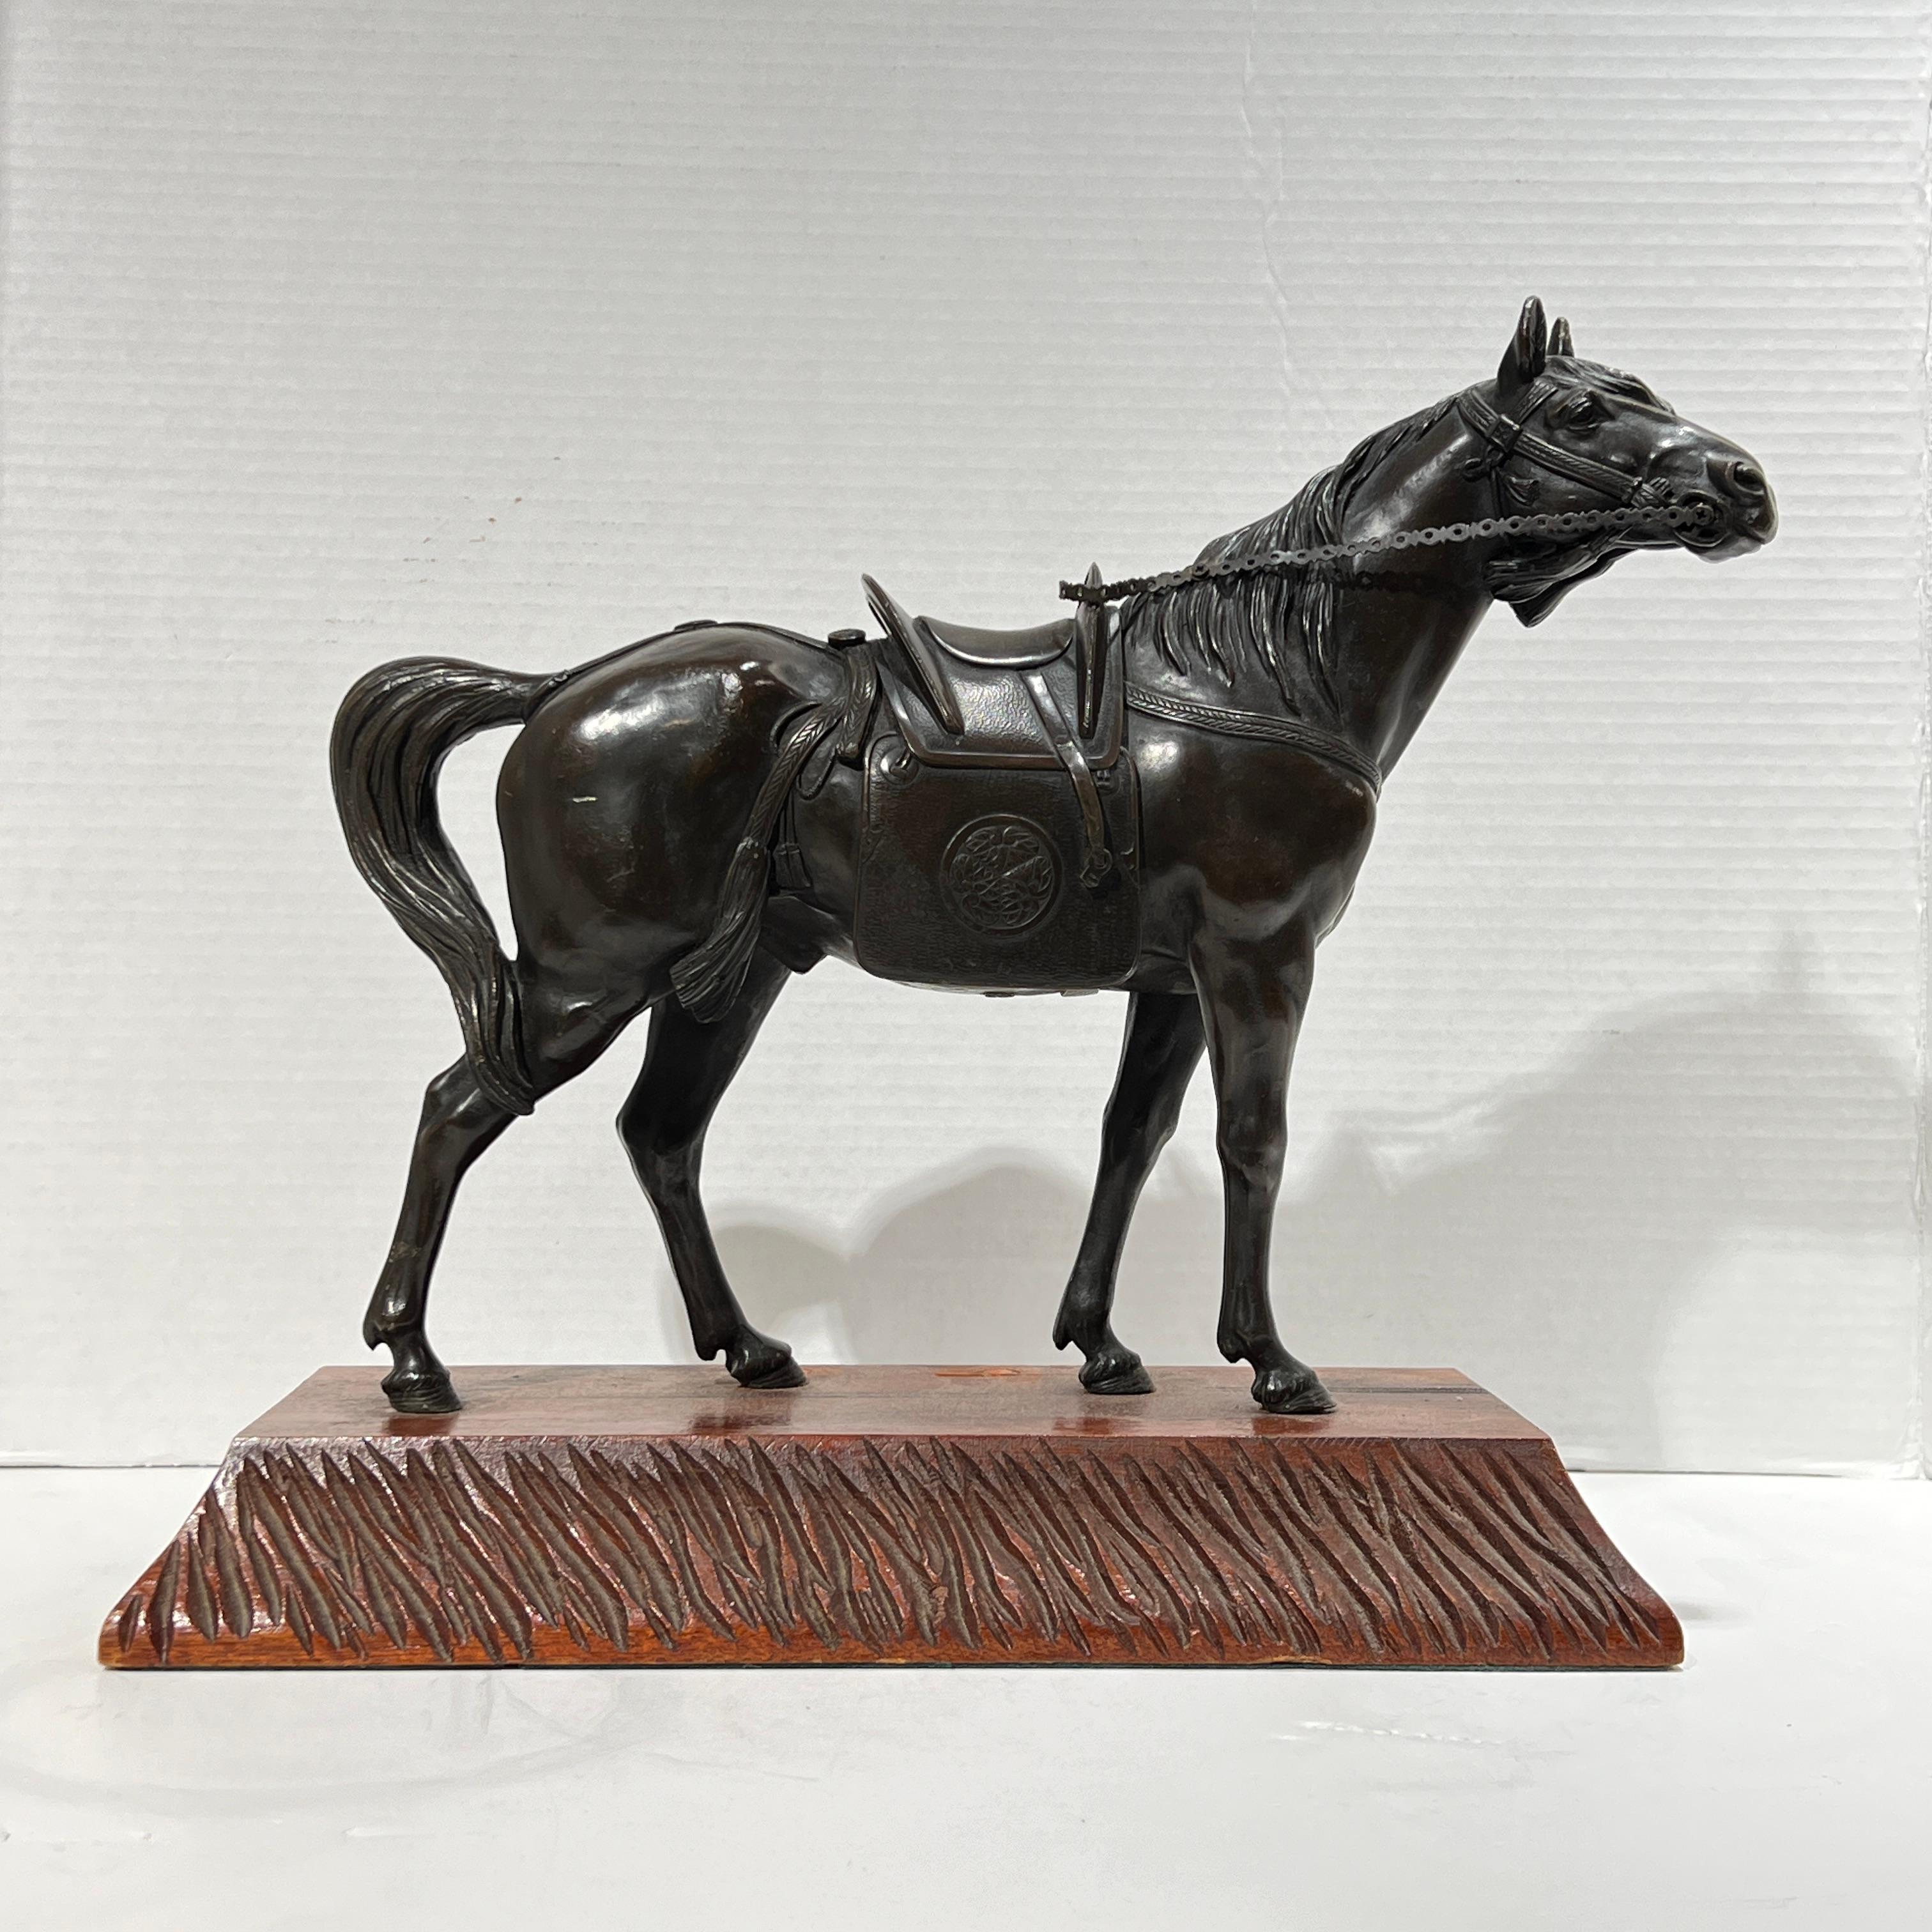 Antique (19th century) patinated bronze figurine of a horse with bridle and saddle, mounted on later wooden pedestal.  Figurine alone measures 14 by 11 by 3.5 inches.  Total height with base 13 inches and depth of the base is 6.5 inches.  Saddle